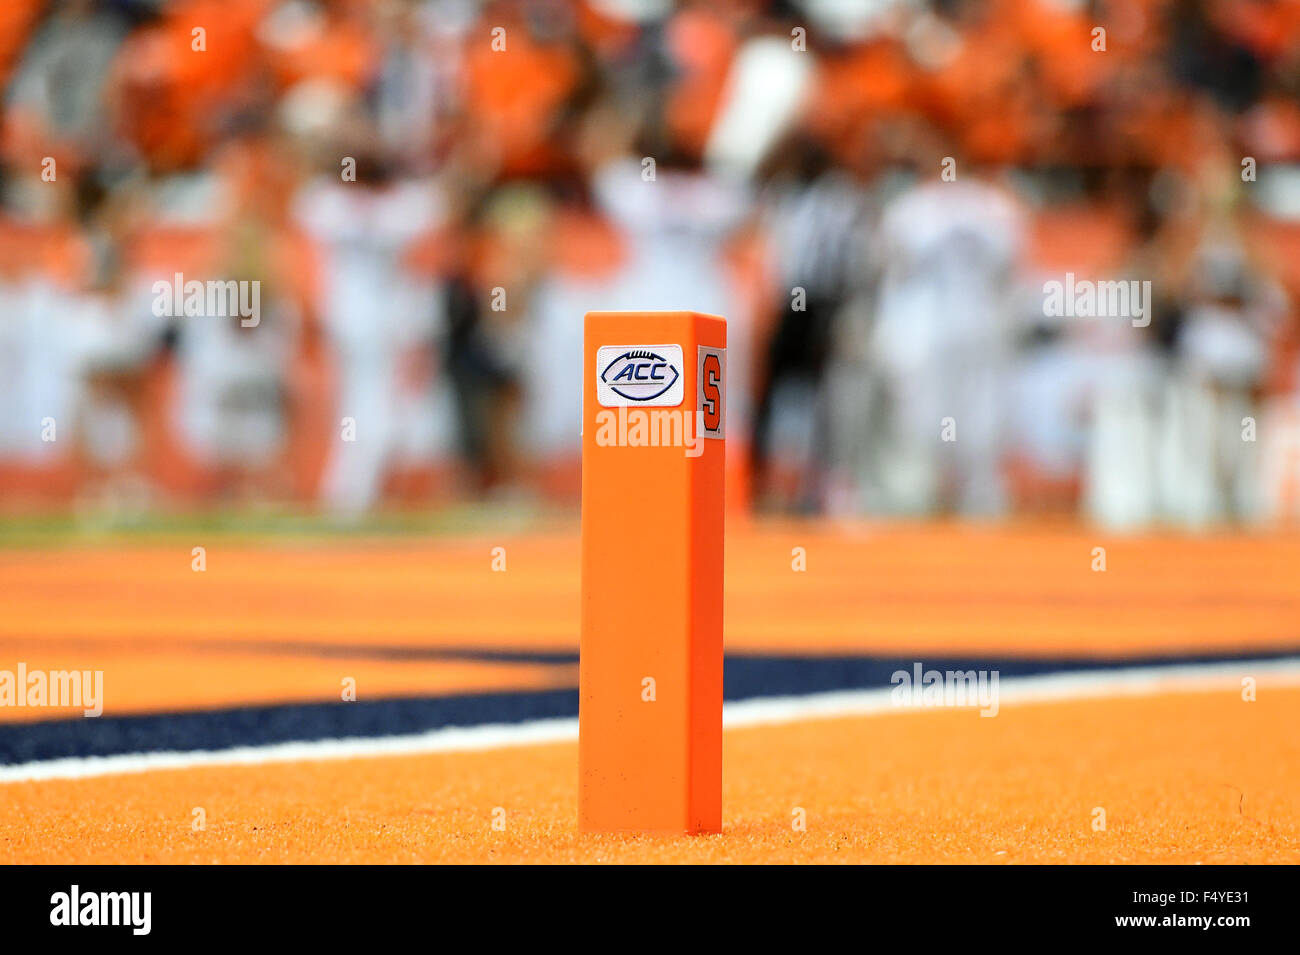 Syracuse, New York, USA. 24th Oct, 2015. General view of an end zone marker with the Atlantic Coast Conference logo during the fourth quarter of an NCAA football game between the Pittsburgh Panthers and the Syracuse Orange on Saturday, October 24, 2015, at the Carrier Dome in Syracuse, New York. Pittsburgh won the game 23-20. Rich Barnes/CSM/Alamy Live News Stock Photo